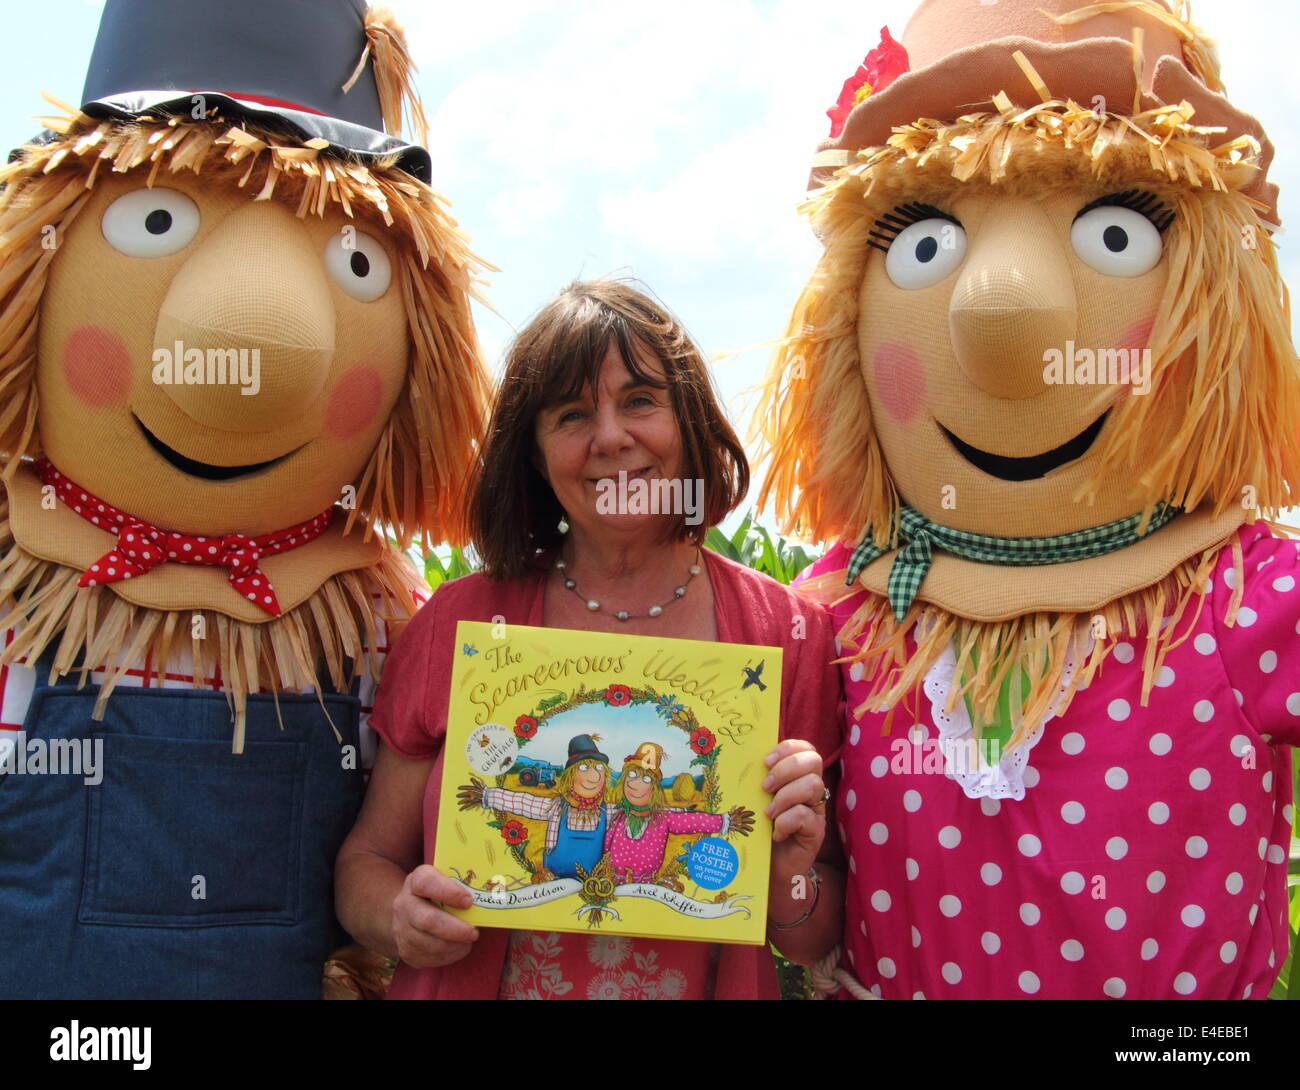 Burton-on-Trent, Staffordshire, UK.  9th July, 2014. Julia Donaldson with Harry O'Hay and Betty O'Barley. The National Forest Adventure Farm launches its 11th annual 10-acre maize maze that, this year, celebrates publication of The Scarecrows’ Wedding book from the creators of The Gruffalo & Stick Man.  Designed in the shape of The Scarecrows’ Wedding characters Betty O’Barley and Harry O’Hay, the maze features three miles of pathways, bridges & viewing towers. Credit:  Deborah Vernon/Alamy Live News Stock Photo